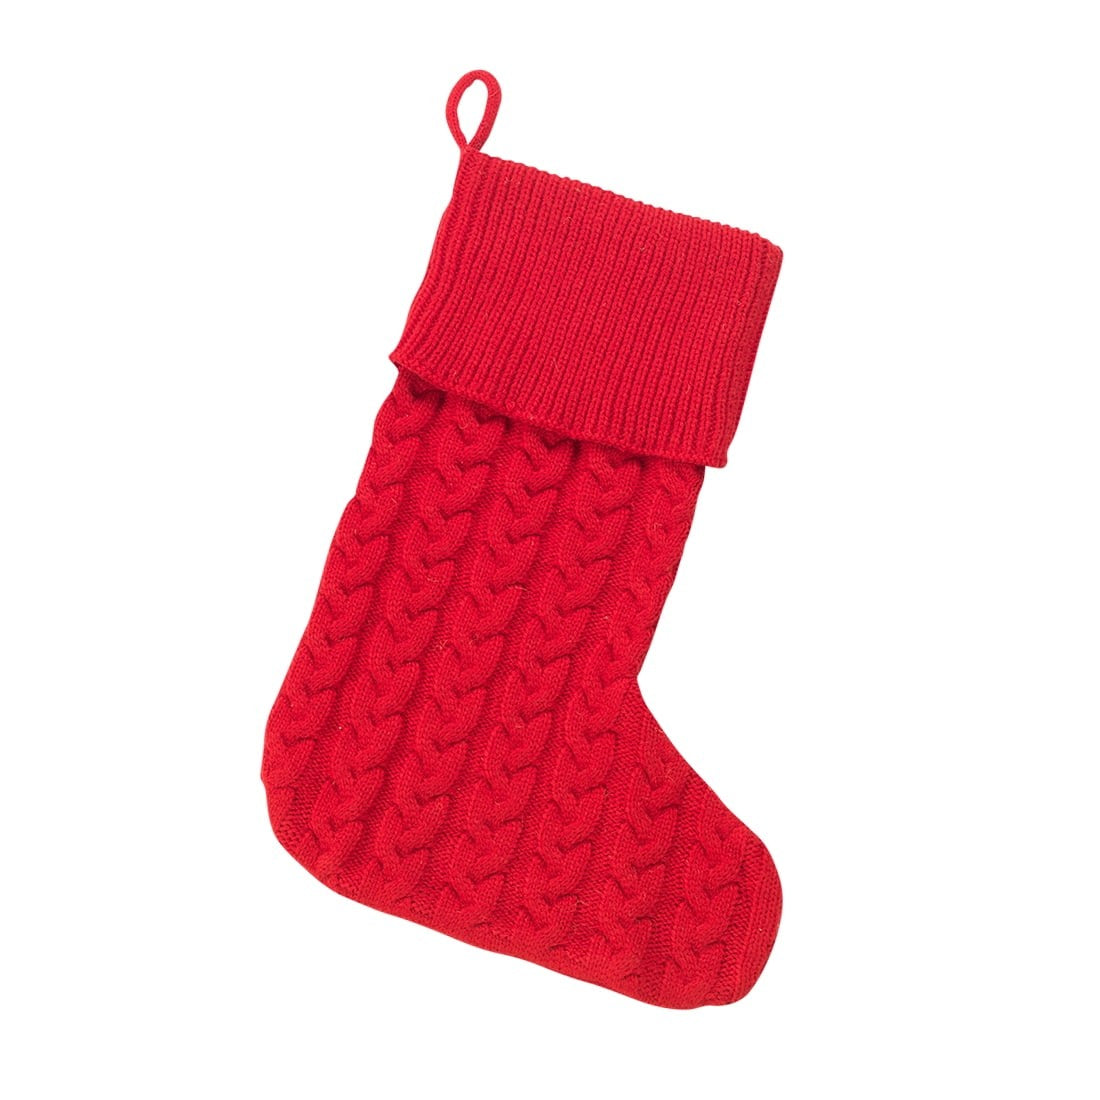 Personalized Red Knit Stocking